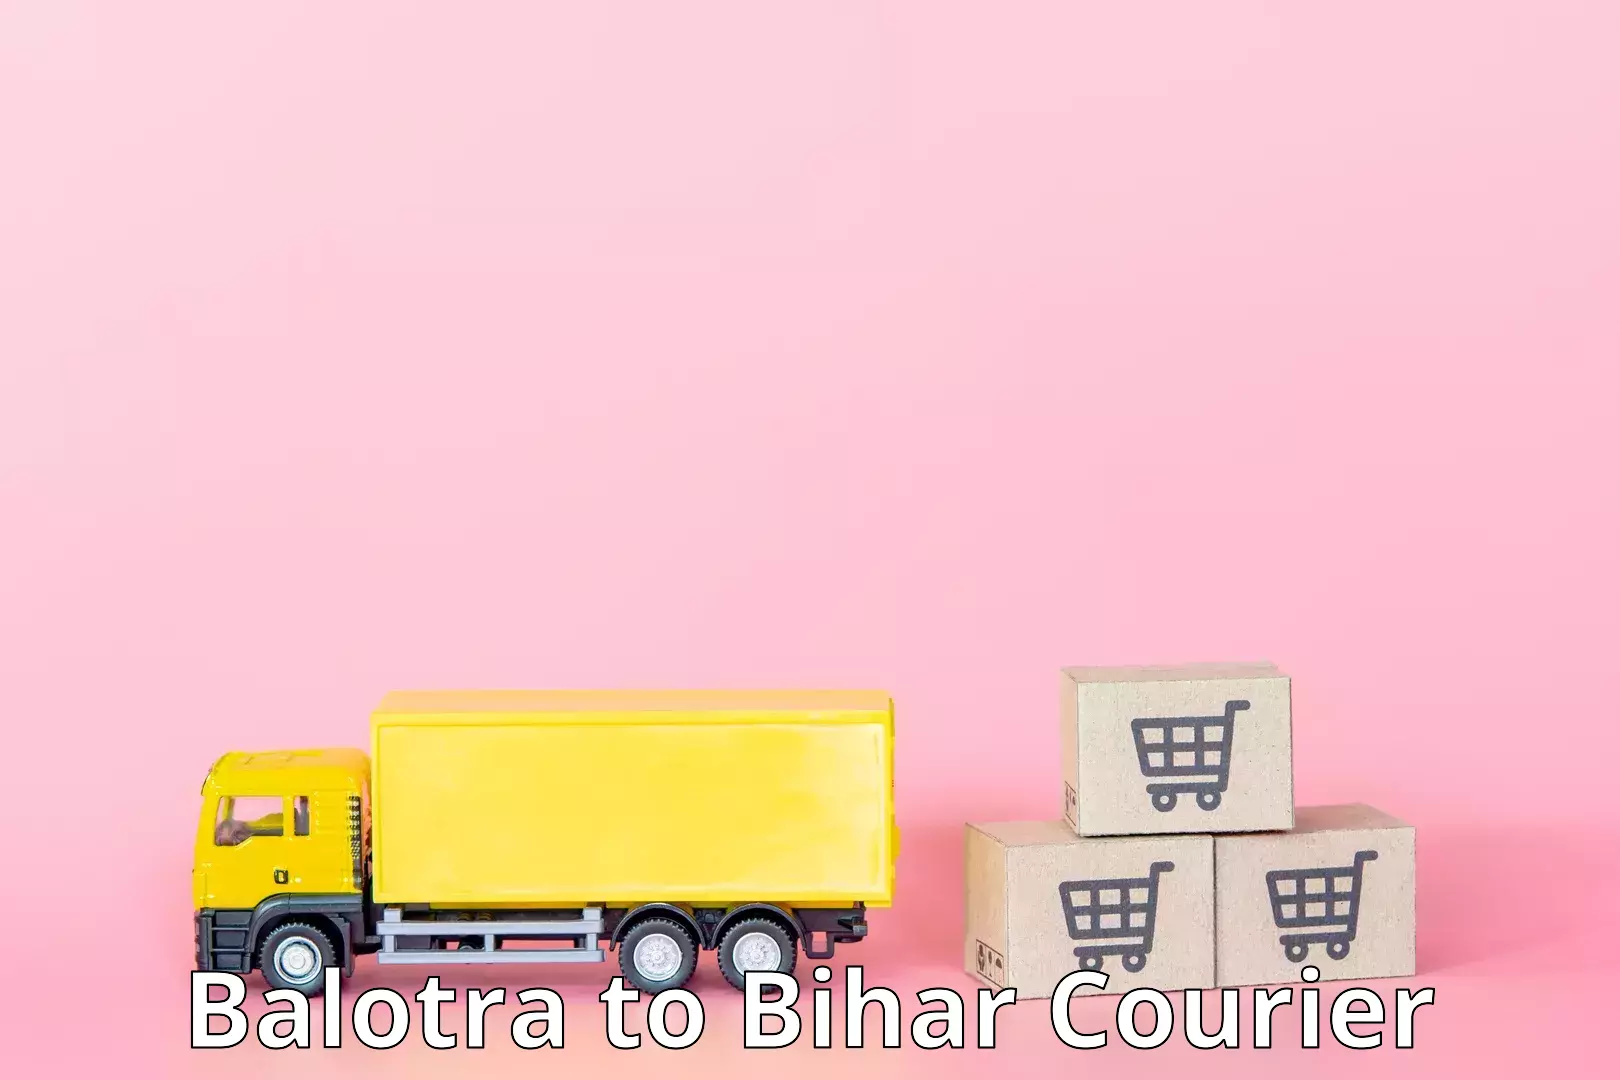 Customer-oriented courier services Balotra to Dhaka